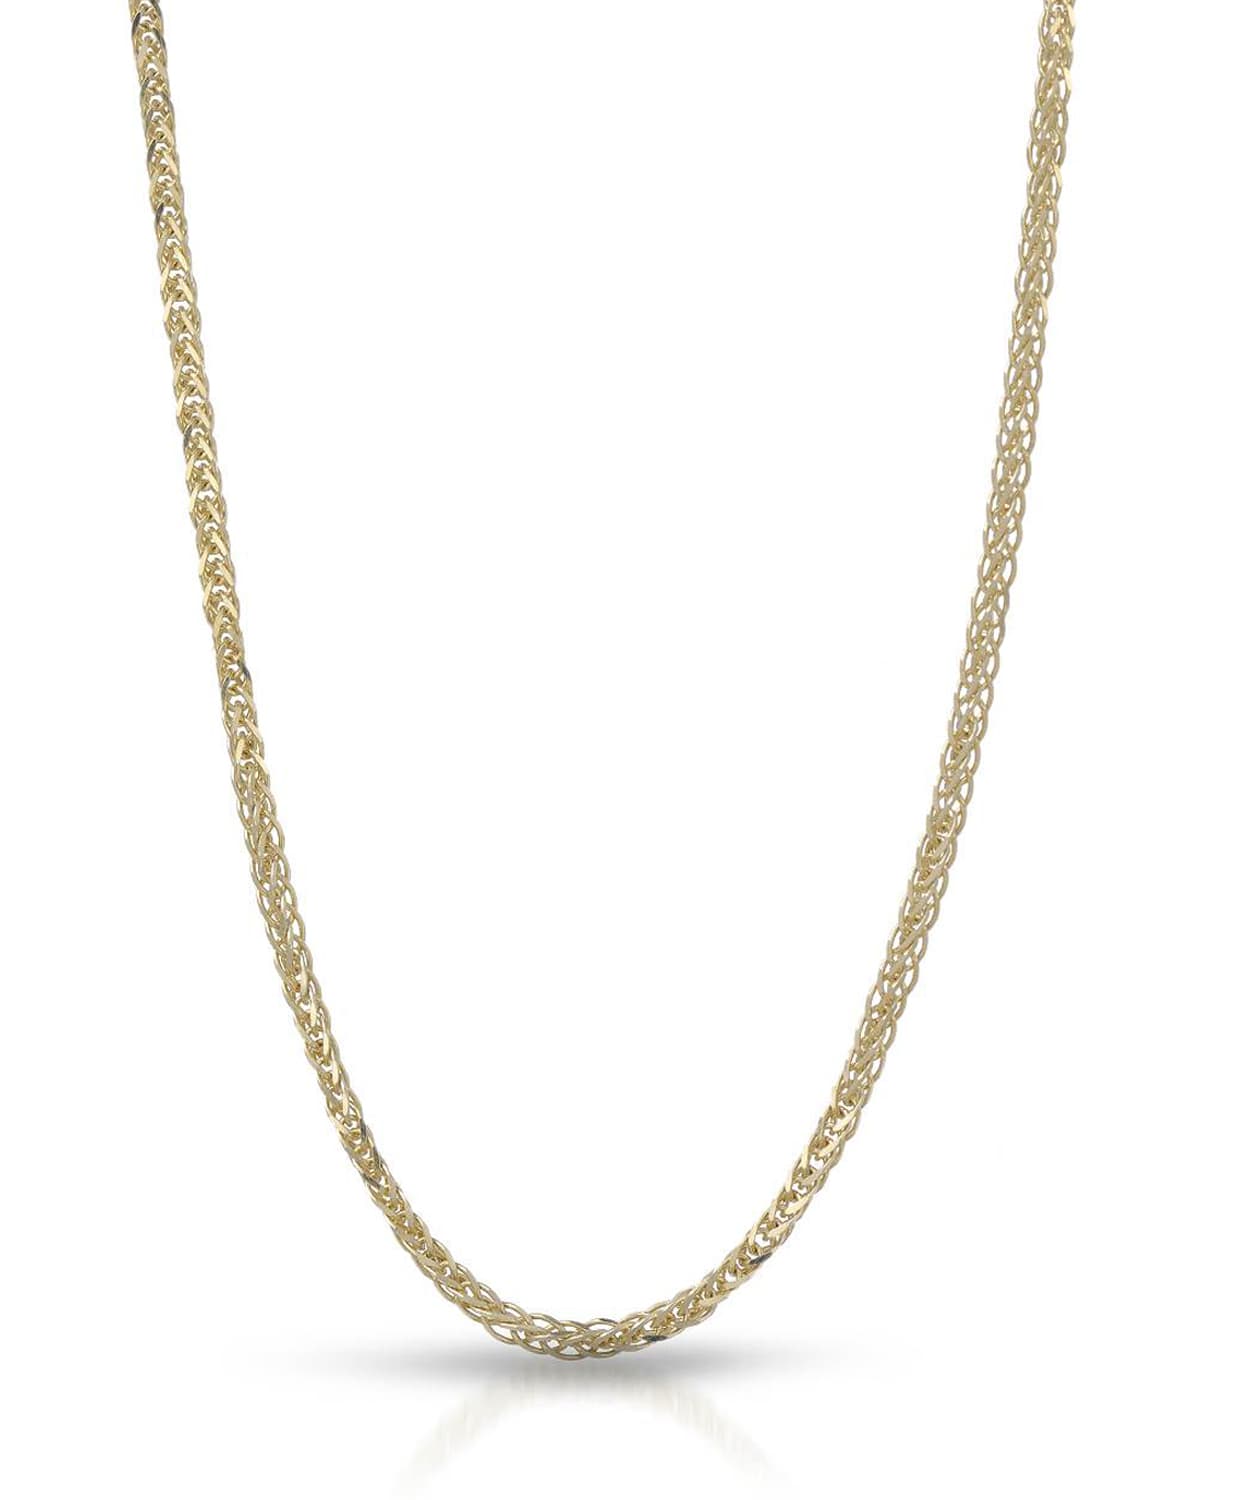 0.8mm 14k Yellow Gold Dainty Square Wheat Chain View 1